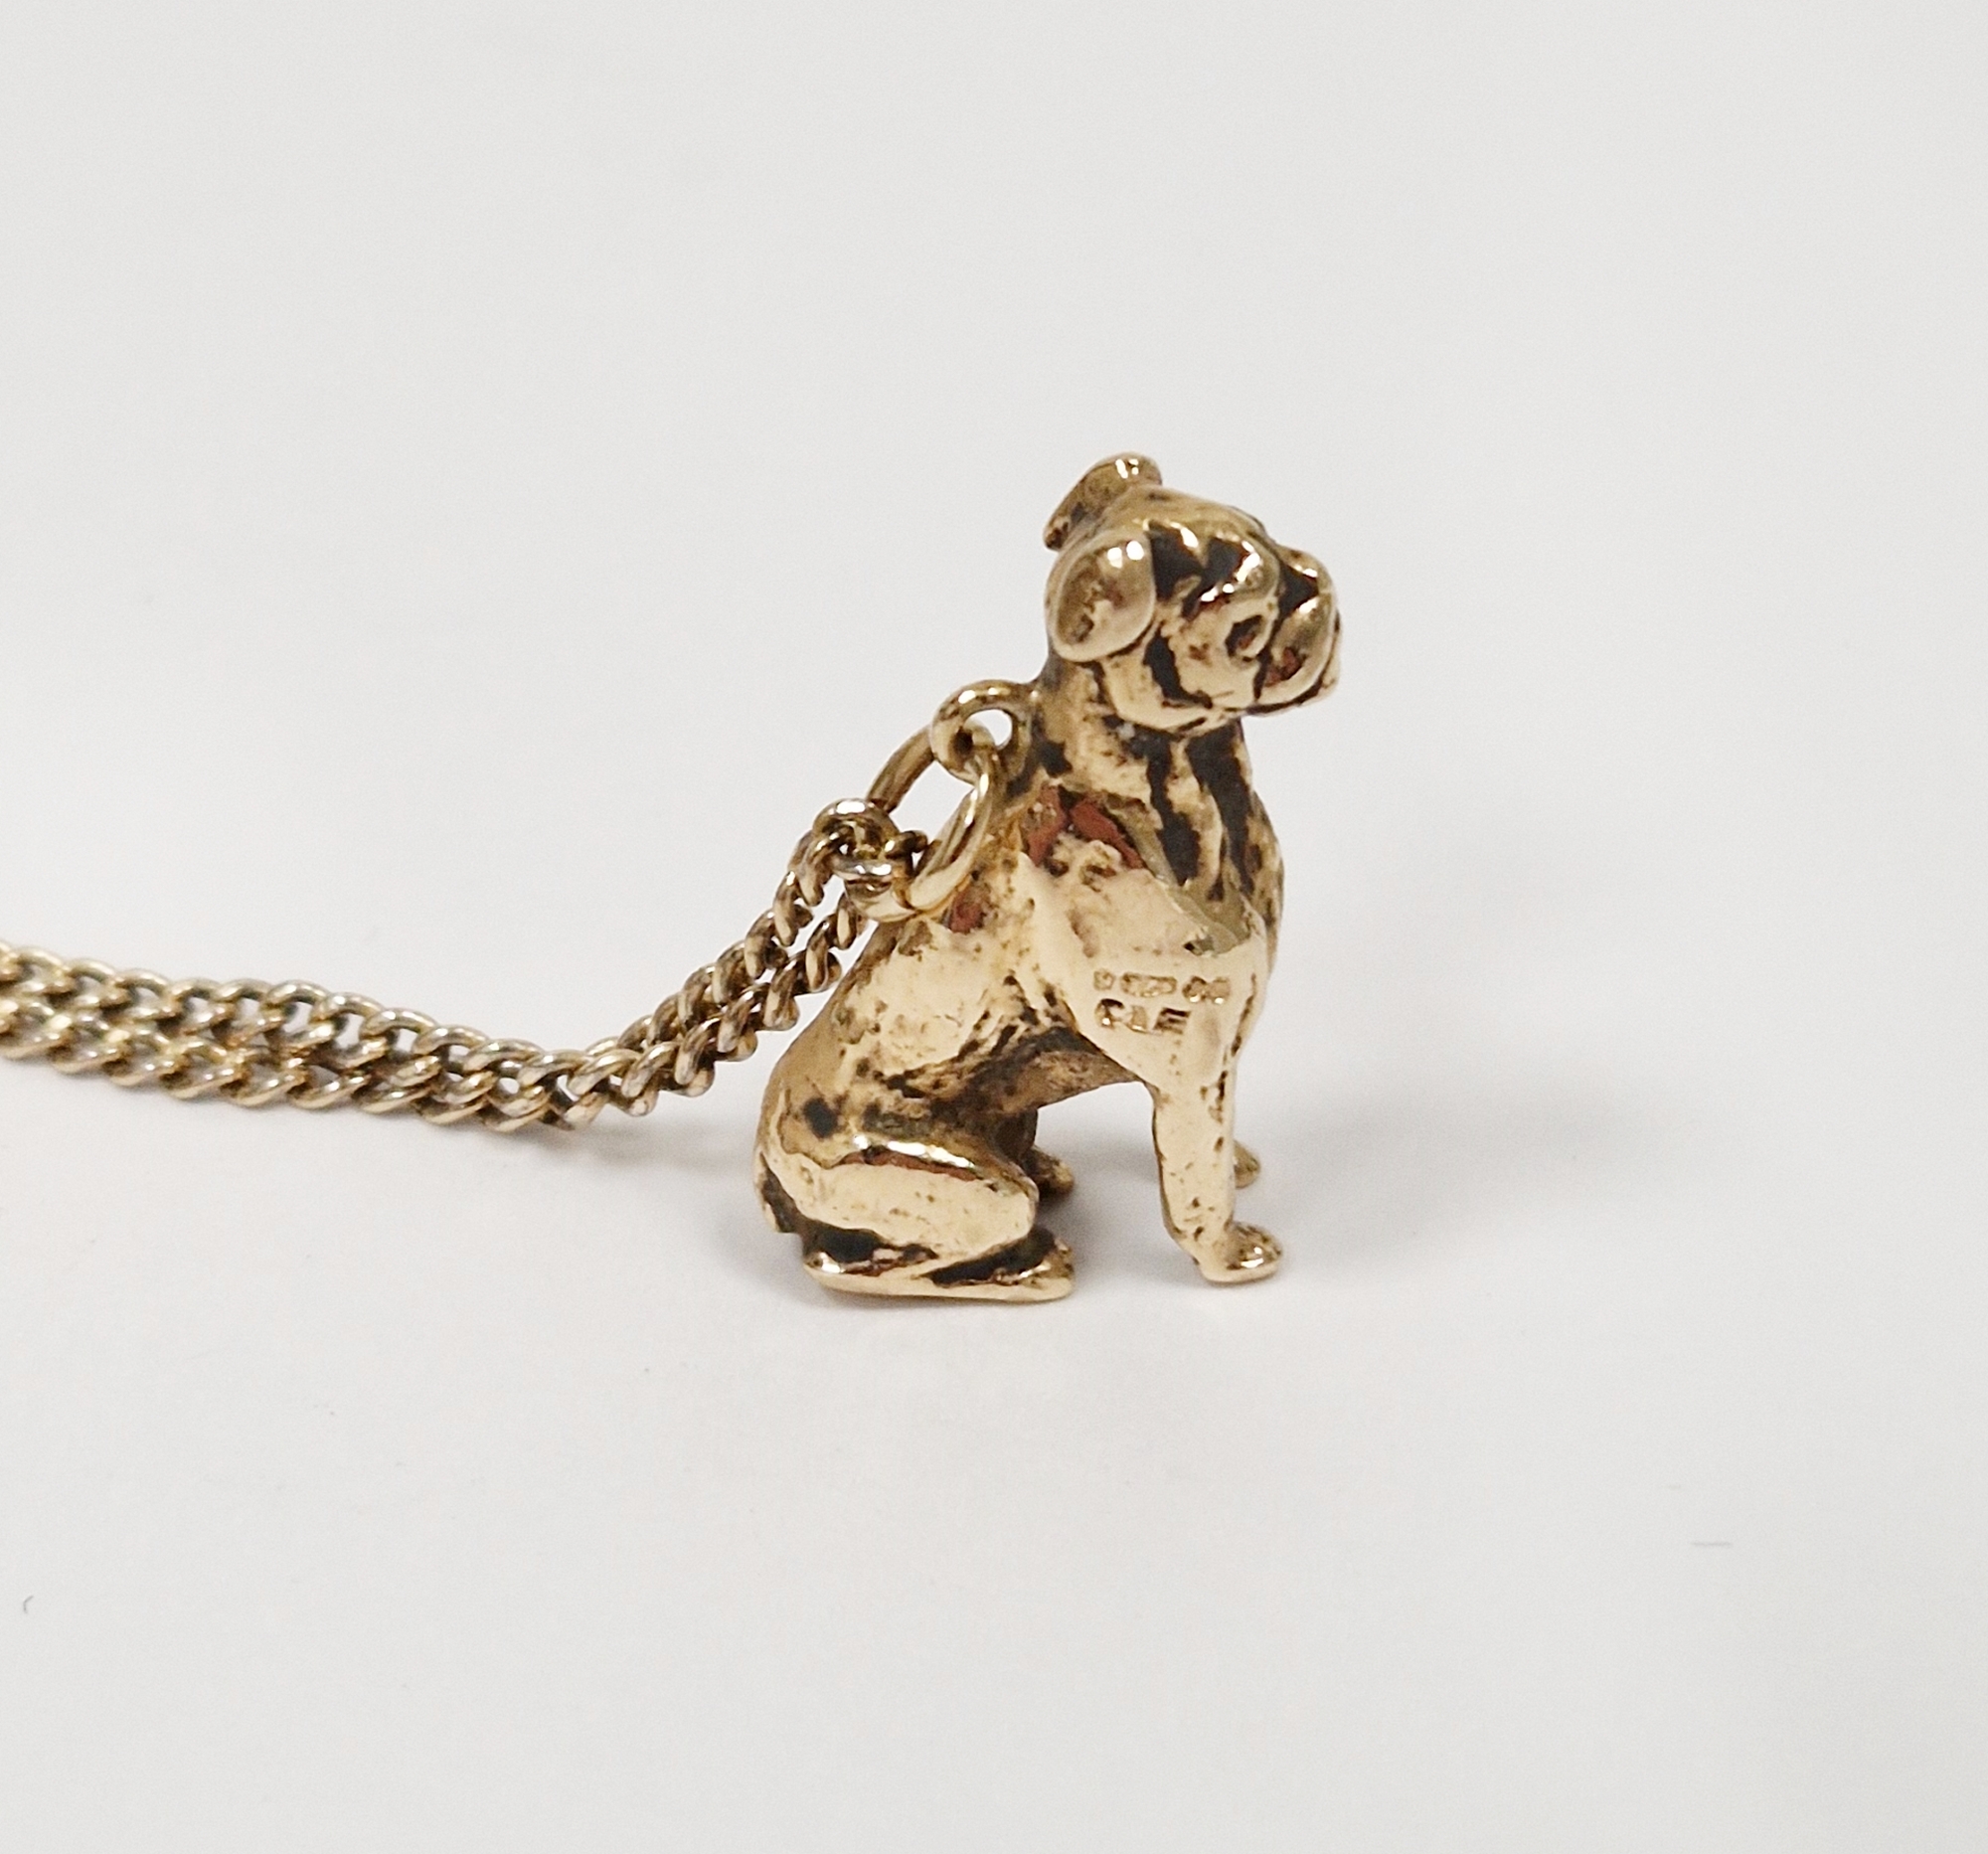 9ct gold bulldog pendant on 9K curb link chain, 15.56g total approx.